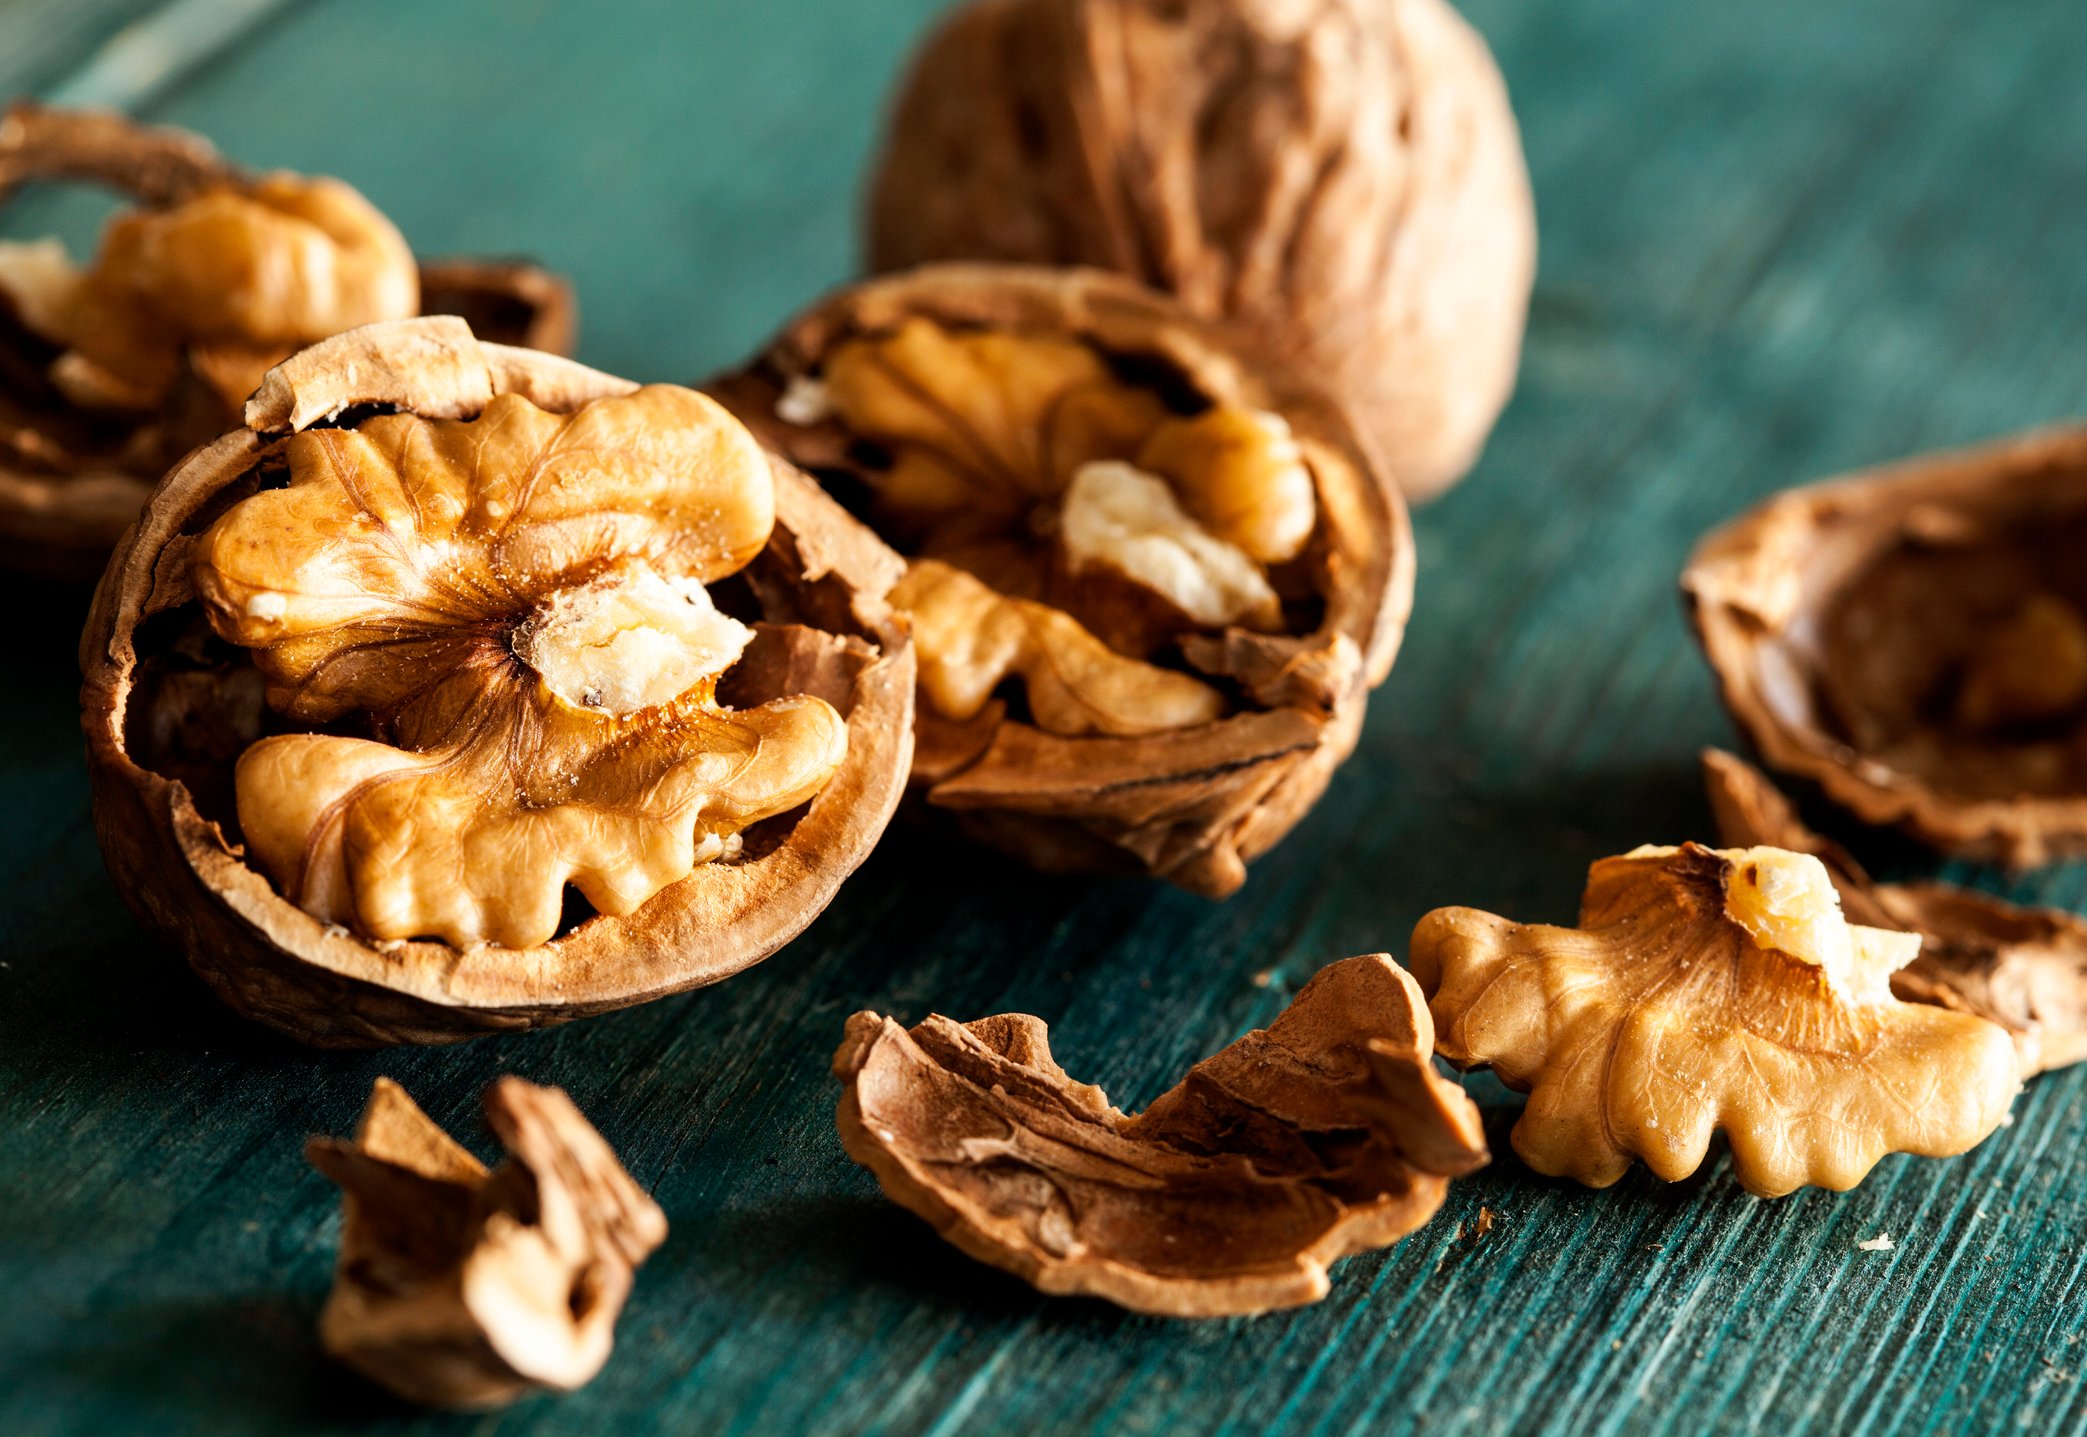 Walnuts can help improve your sperm count.